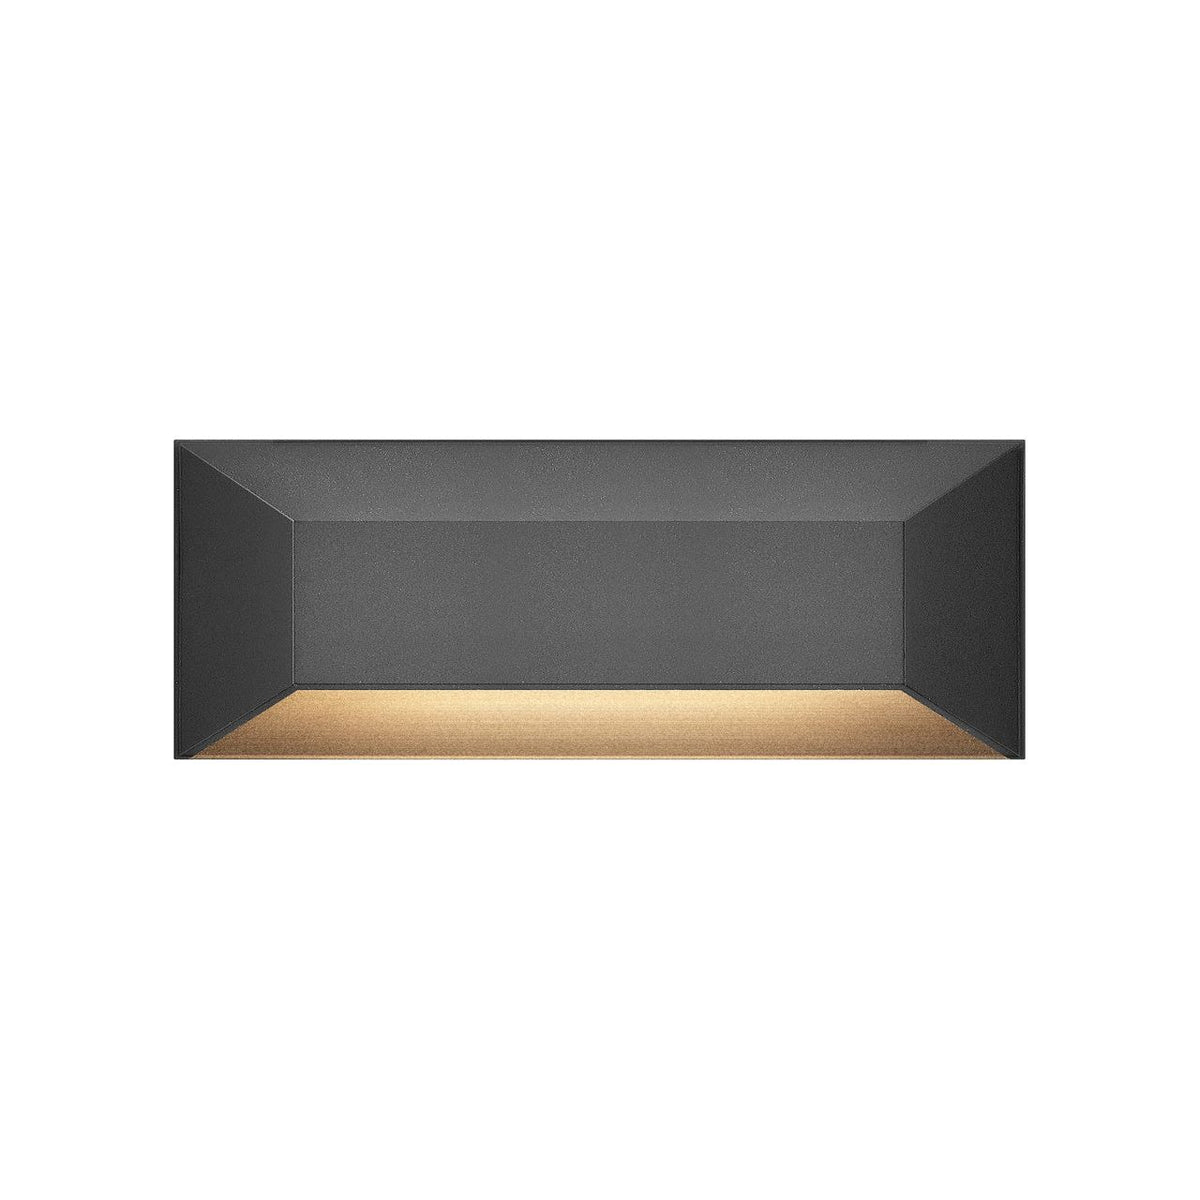 Hinkley Canada - 15228BK - LED Wall Sconce - Nuvi Deck Sconce - Black